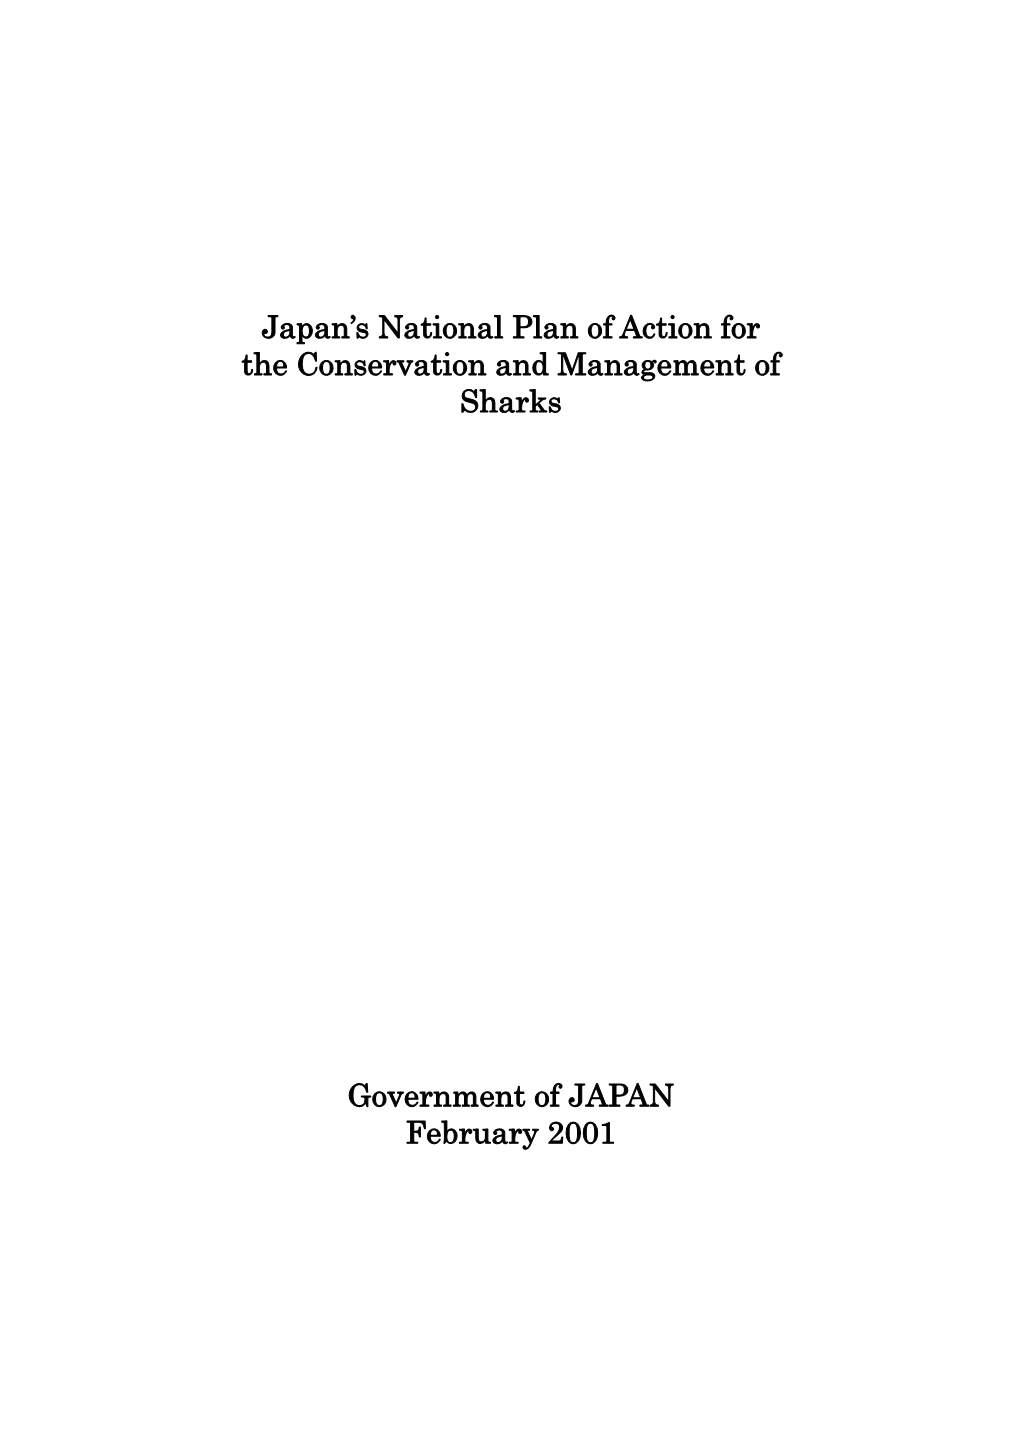 Japan's National Plan of Action for the Conservation and Management Of